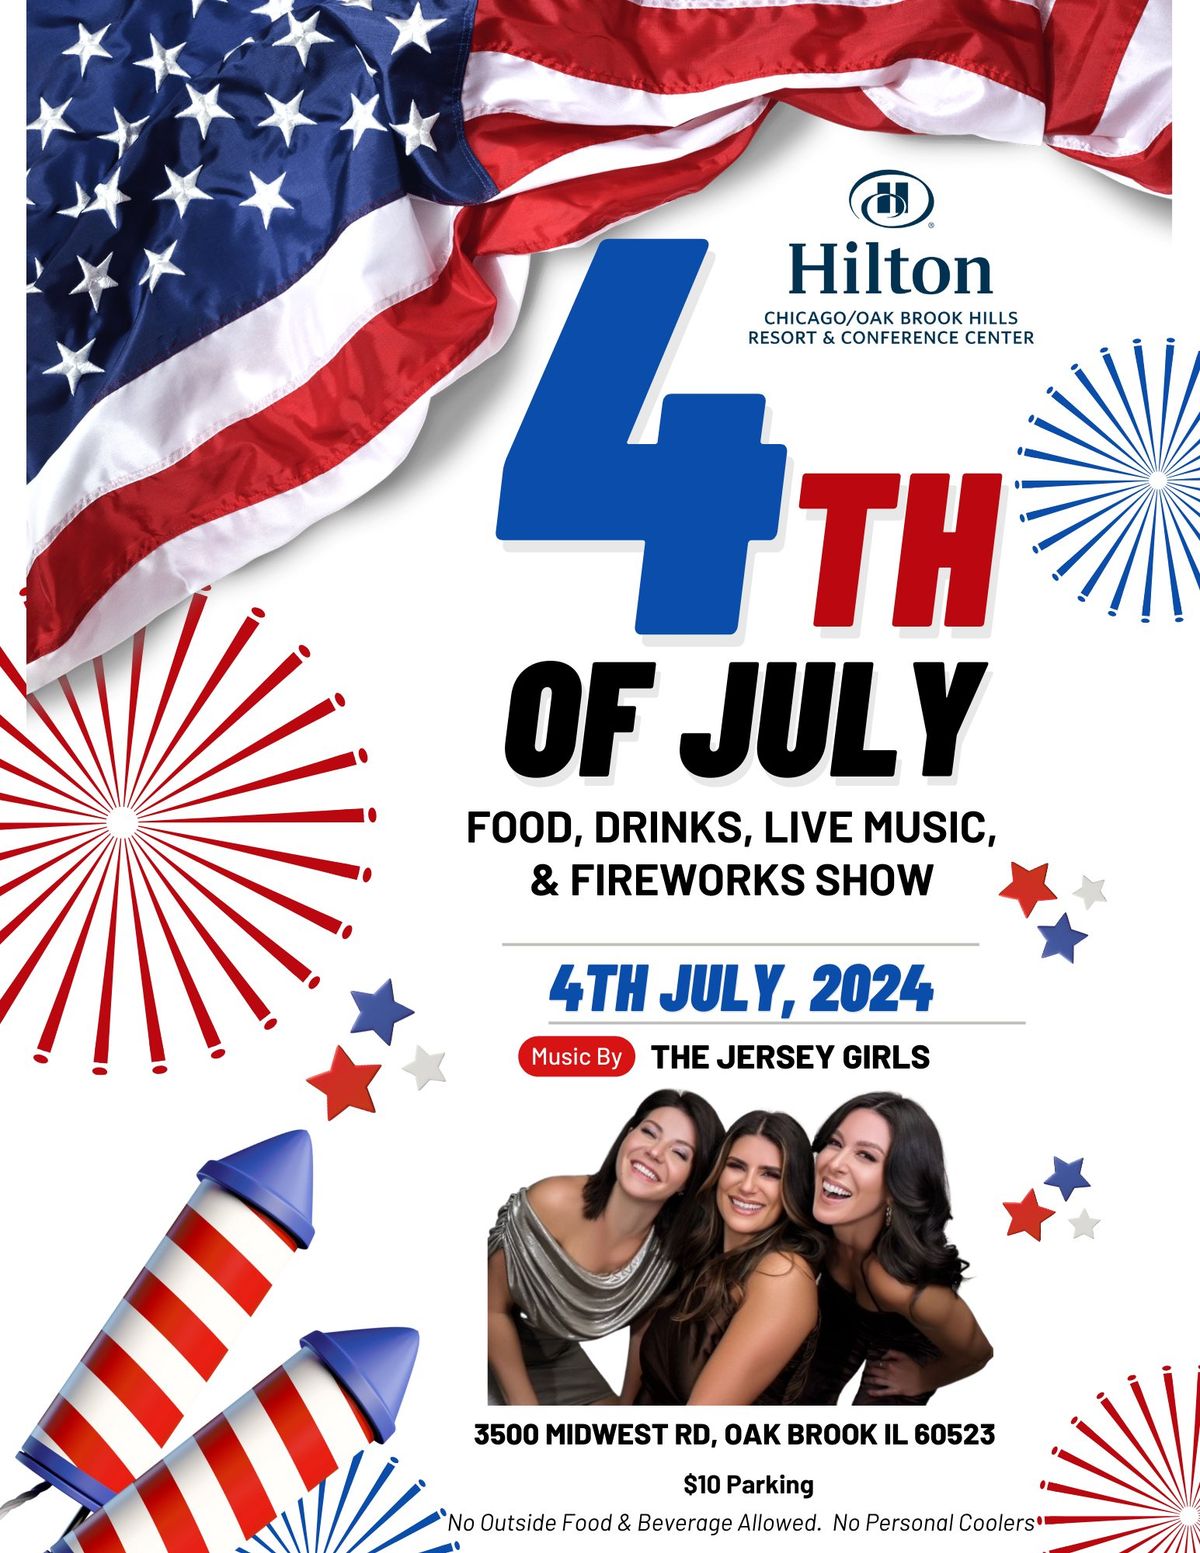 JULY 4TH CELEBRATION & FIREWORKS SHOW WITH THE JERSEY GIRLS